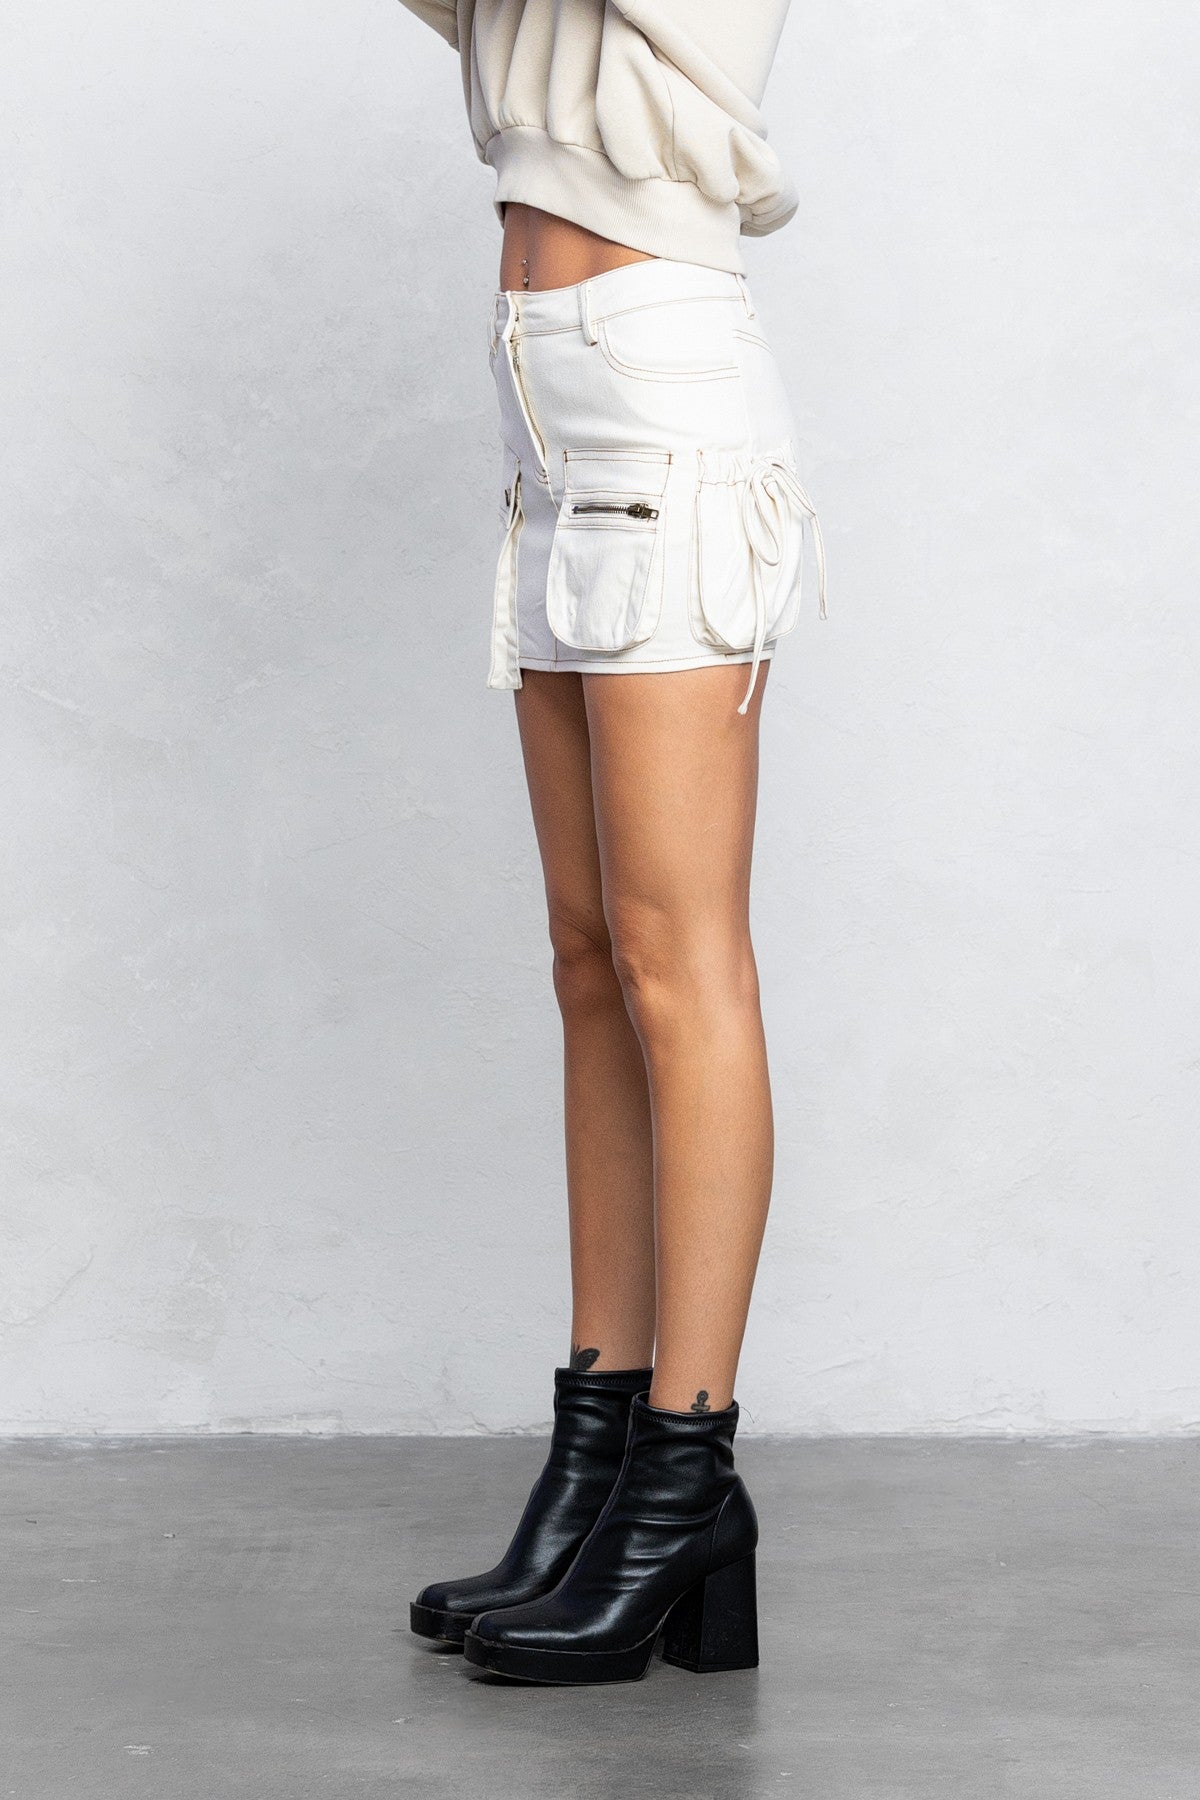 Said Outloud Cargo Skirt Ivory, Mini Skirt by No Vacancy | LIT Boutique